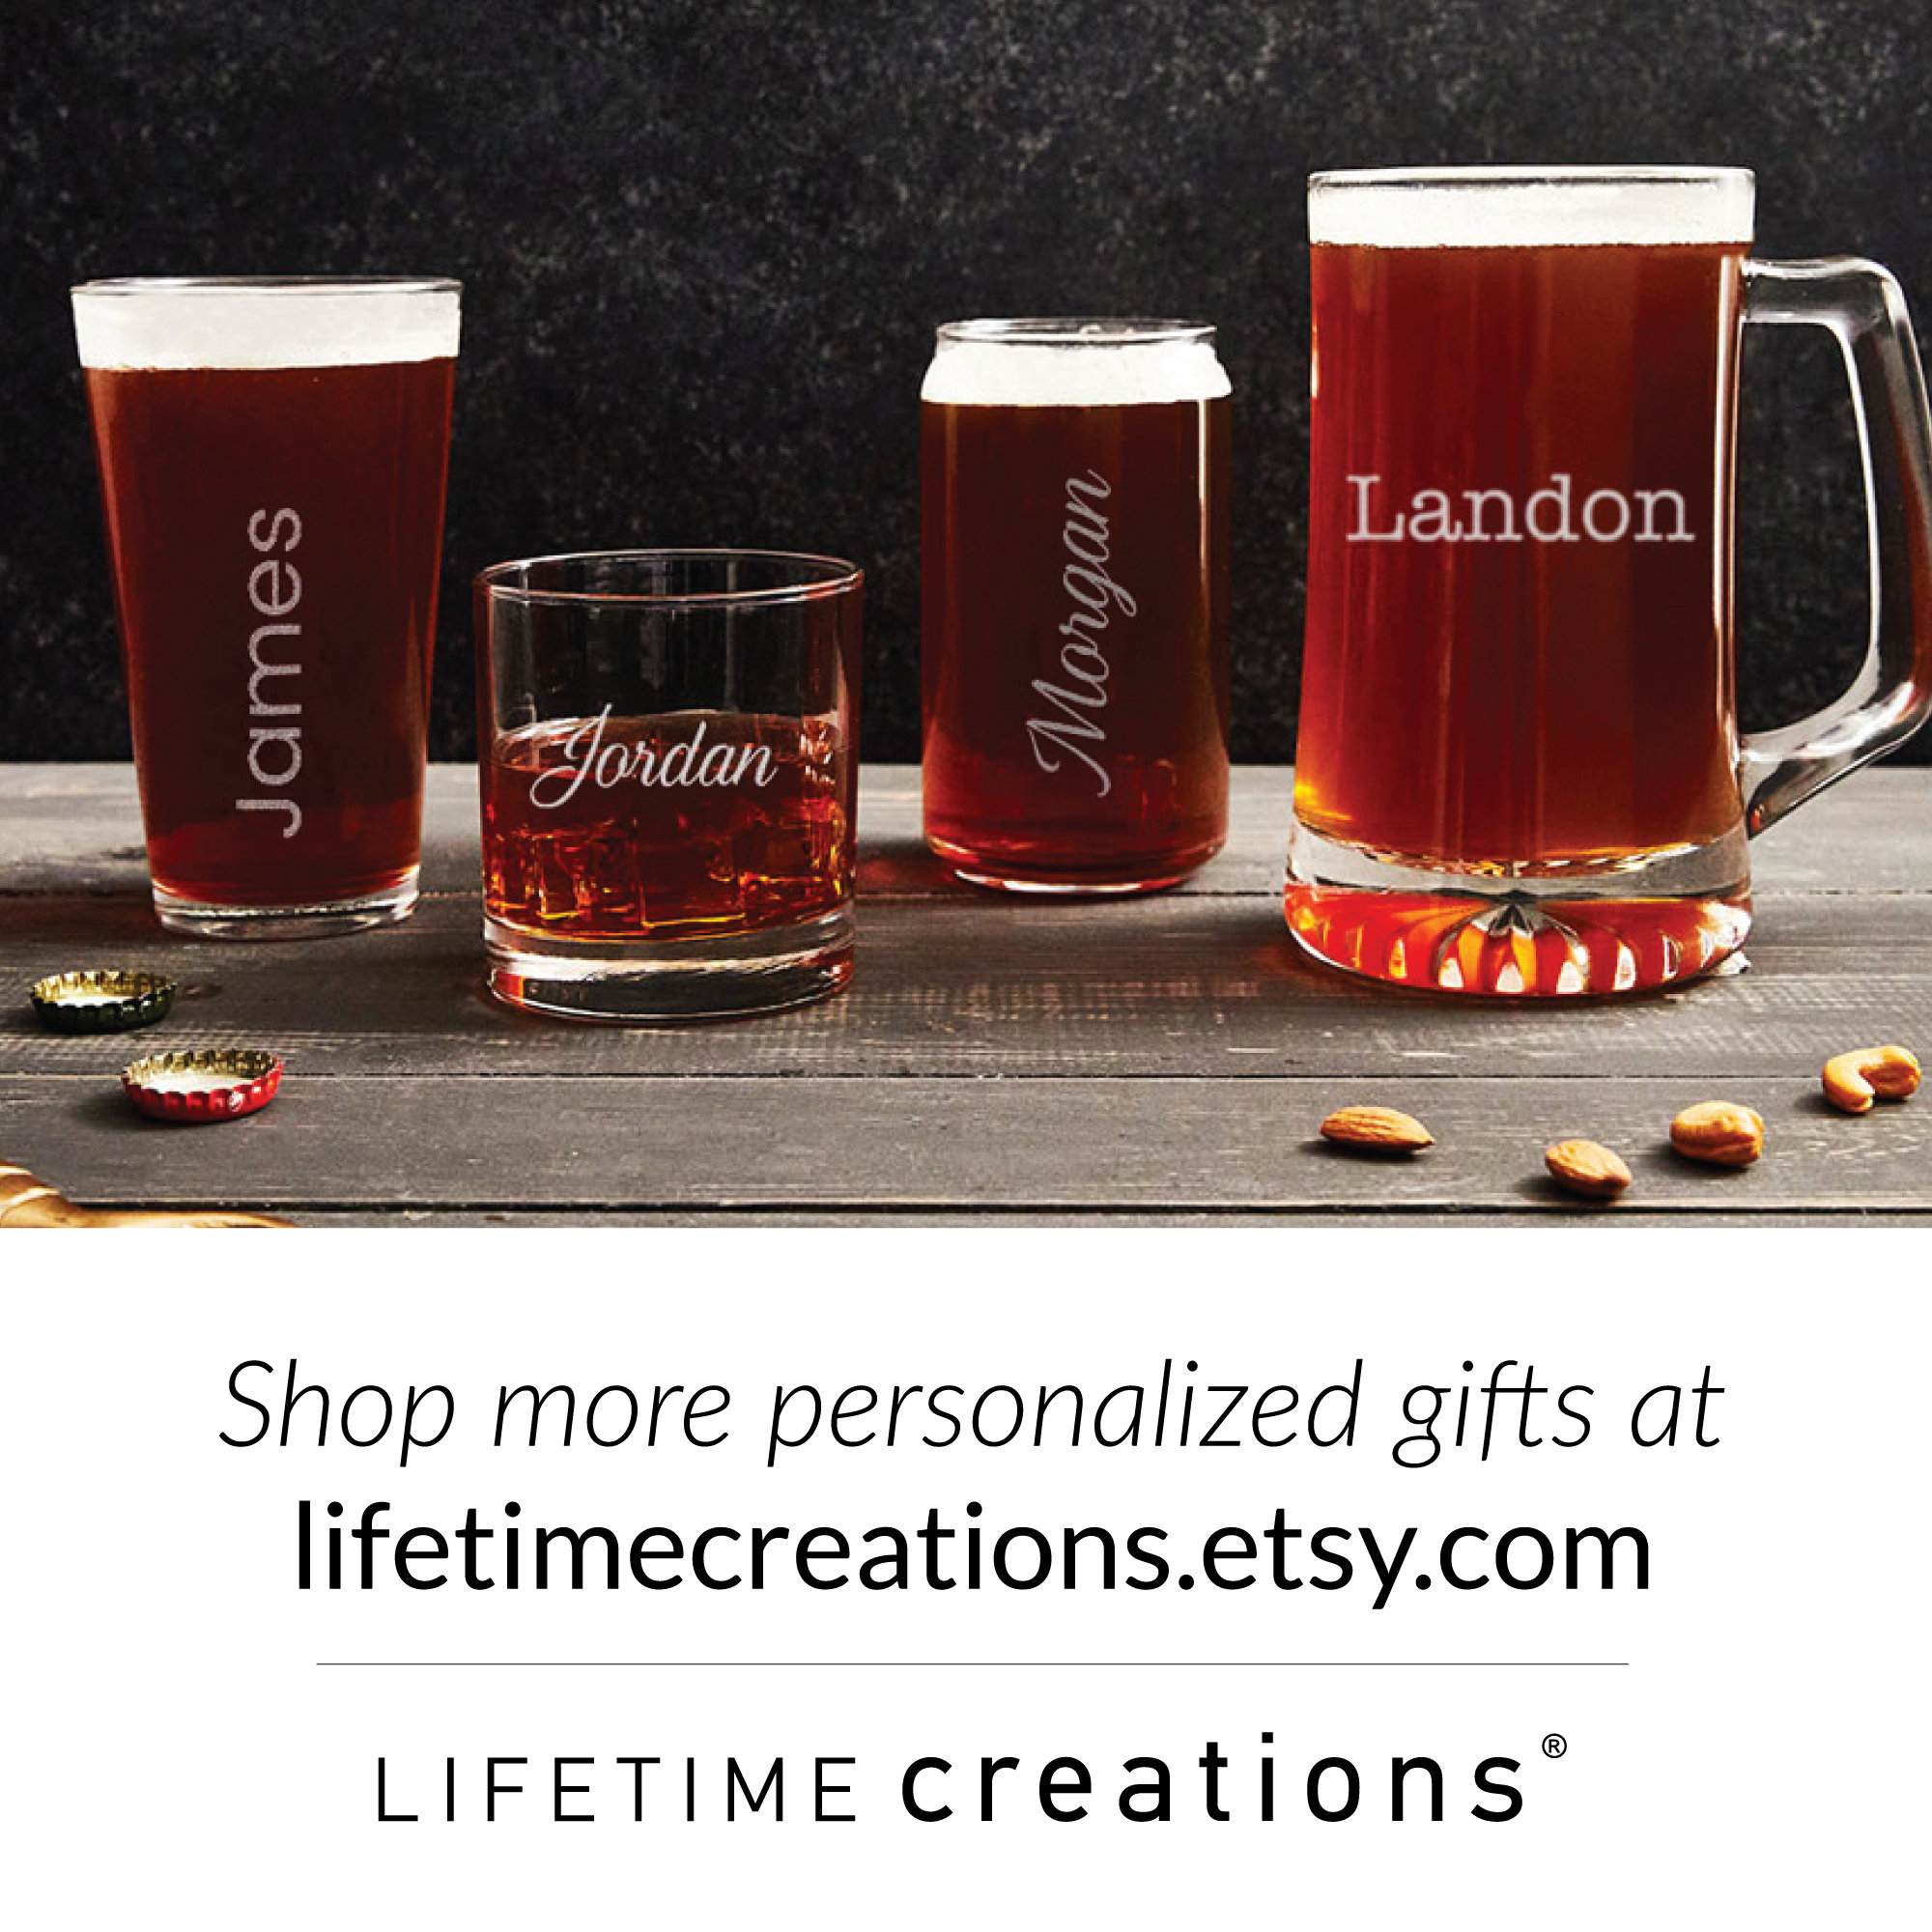 Replacement Lid for Lifetime Creations Tumblers Only